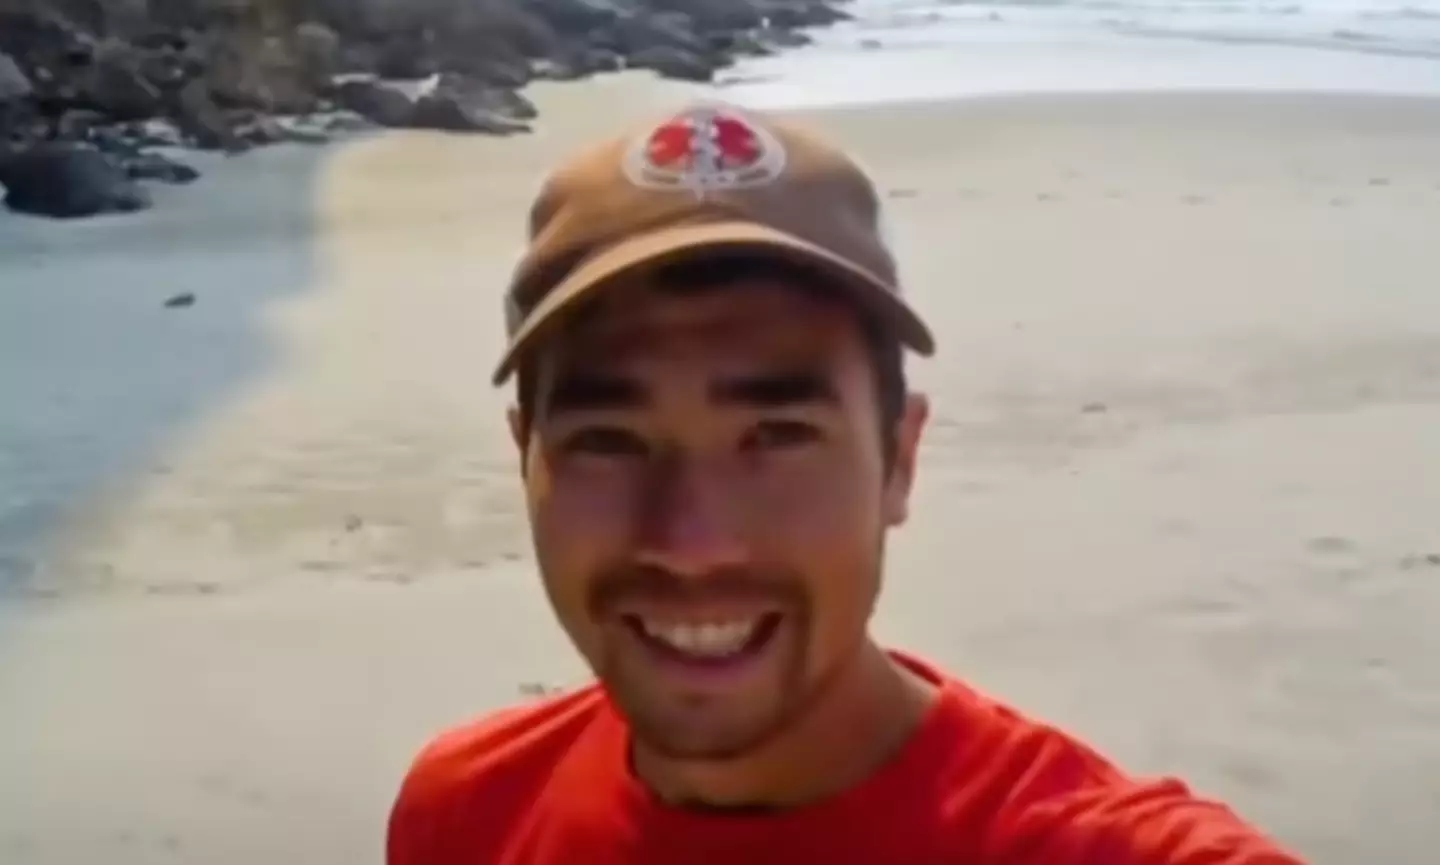 John Allen Chau had been trying to convert the population to Christianity. (YouTube/TODAY)